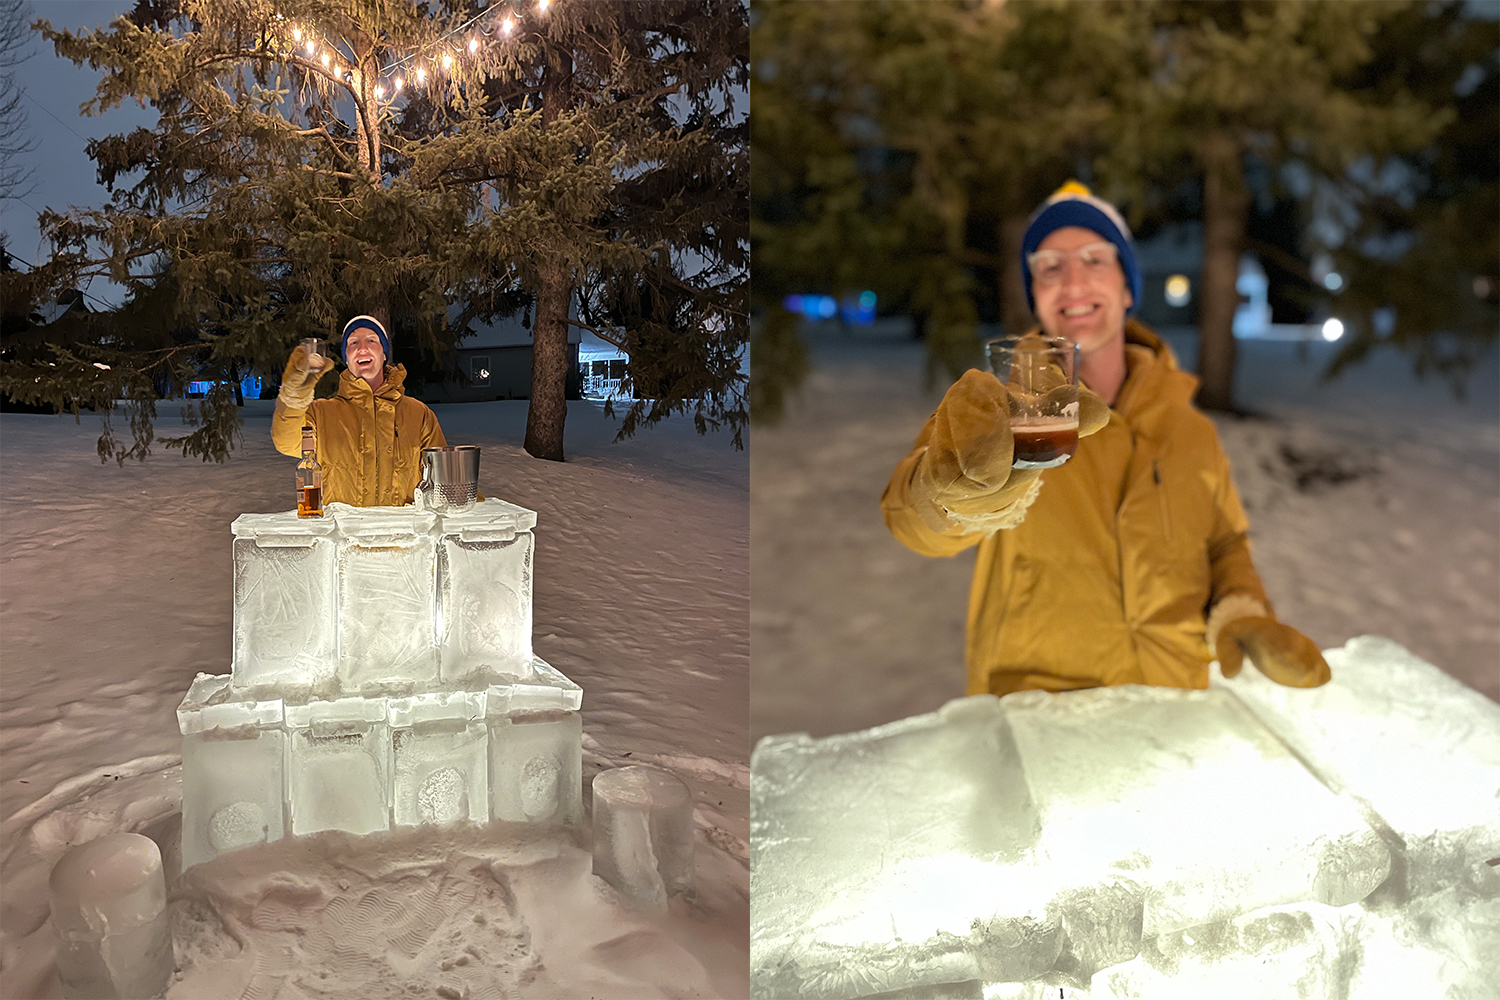 A man standing behind an ice bar in the backyard of a suburban home holding a cocktail. We describe how to make your own ice bar in this advice column.